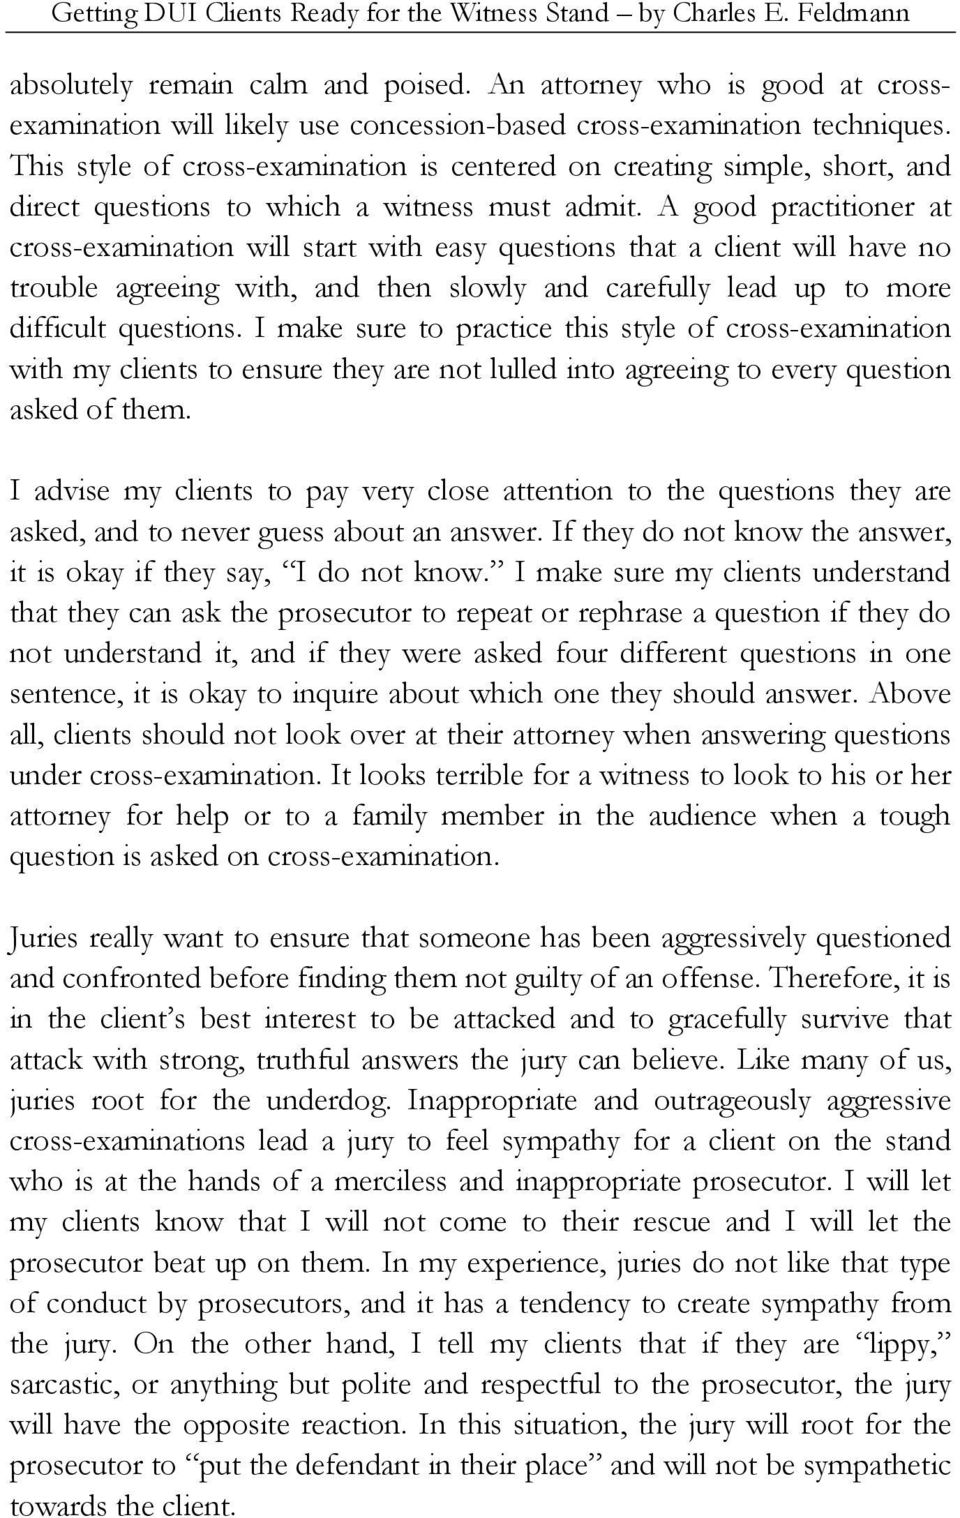 This style of cross-examination is centered on creating simple, short, and direct questions to which a witness must admit.